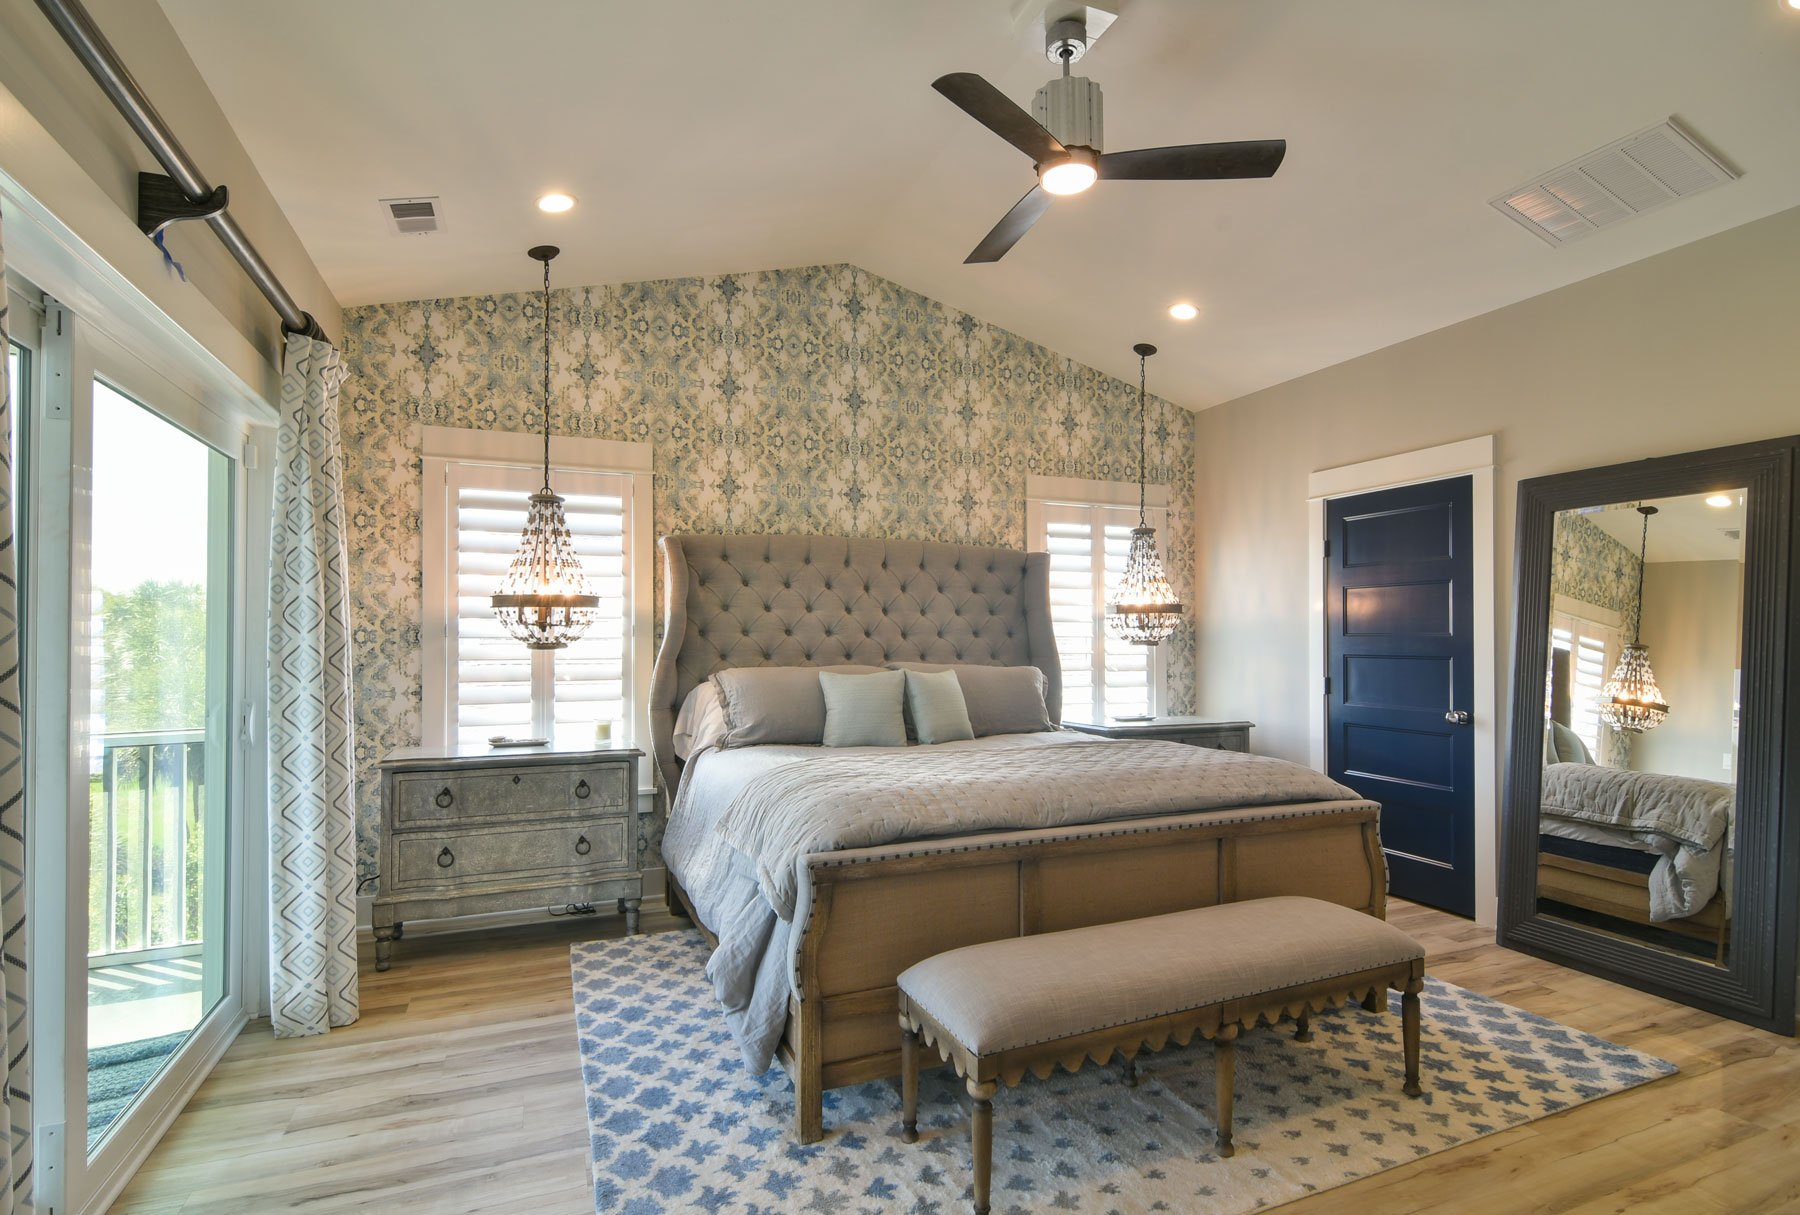 Master Suite with wallpaper accent wall and vaulted ceiling